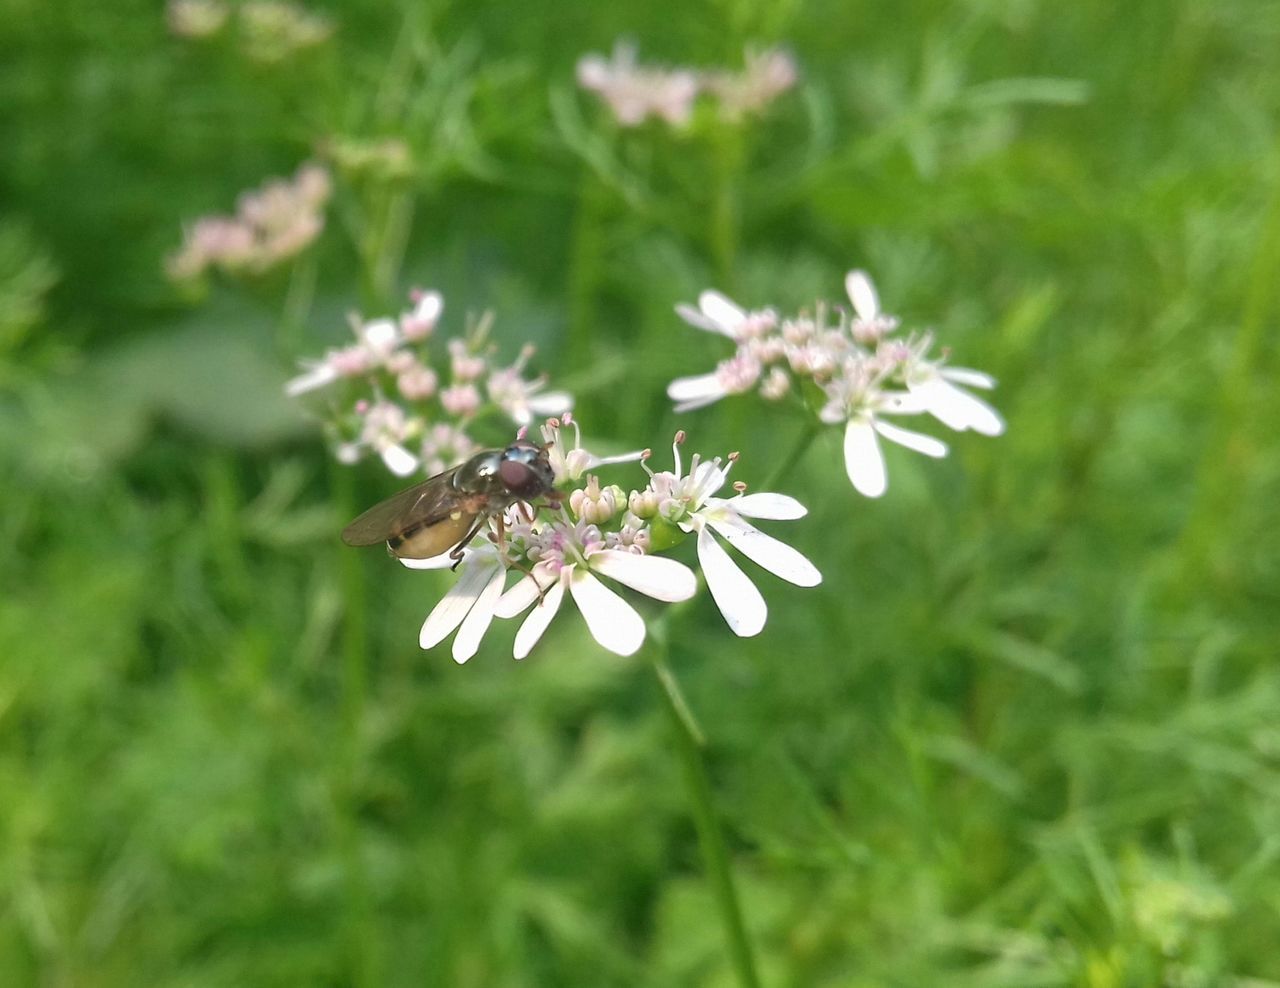 CLOSE-UP OF INSECT ON PLANT